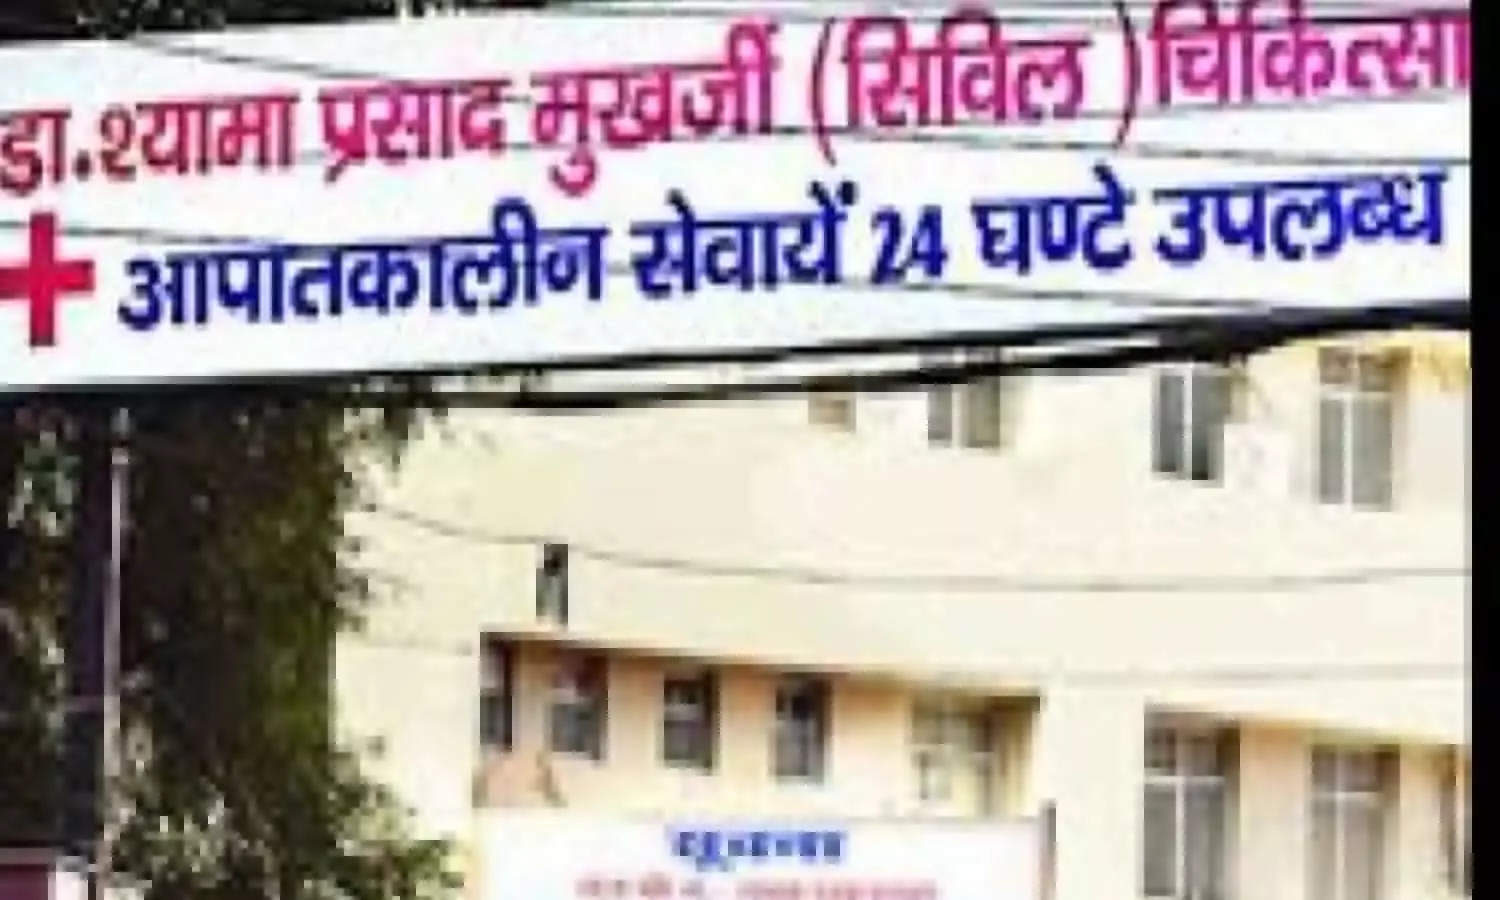 Lucknow Civil hospital does not have adequate arrangements to protect the timirdars from cold